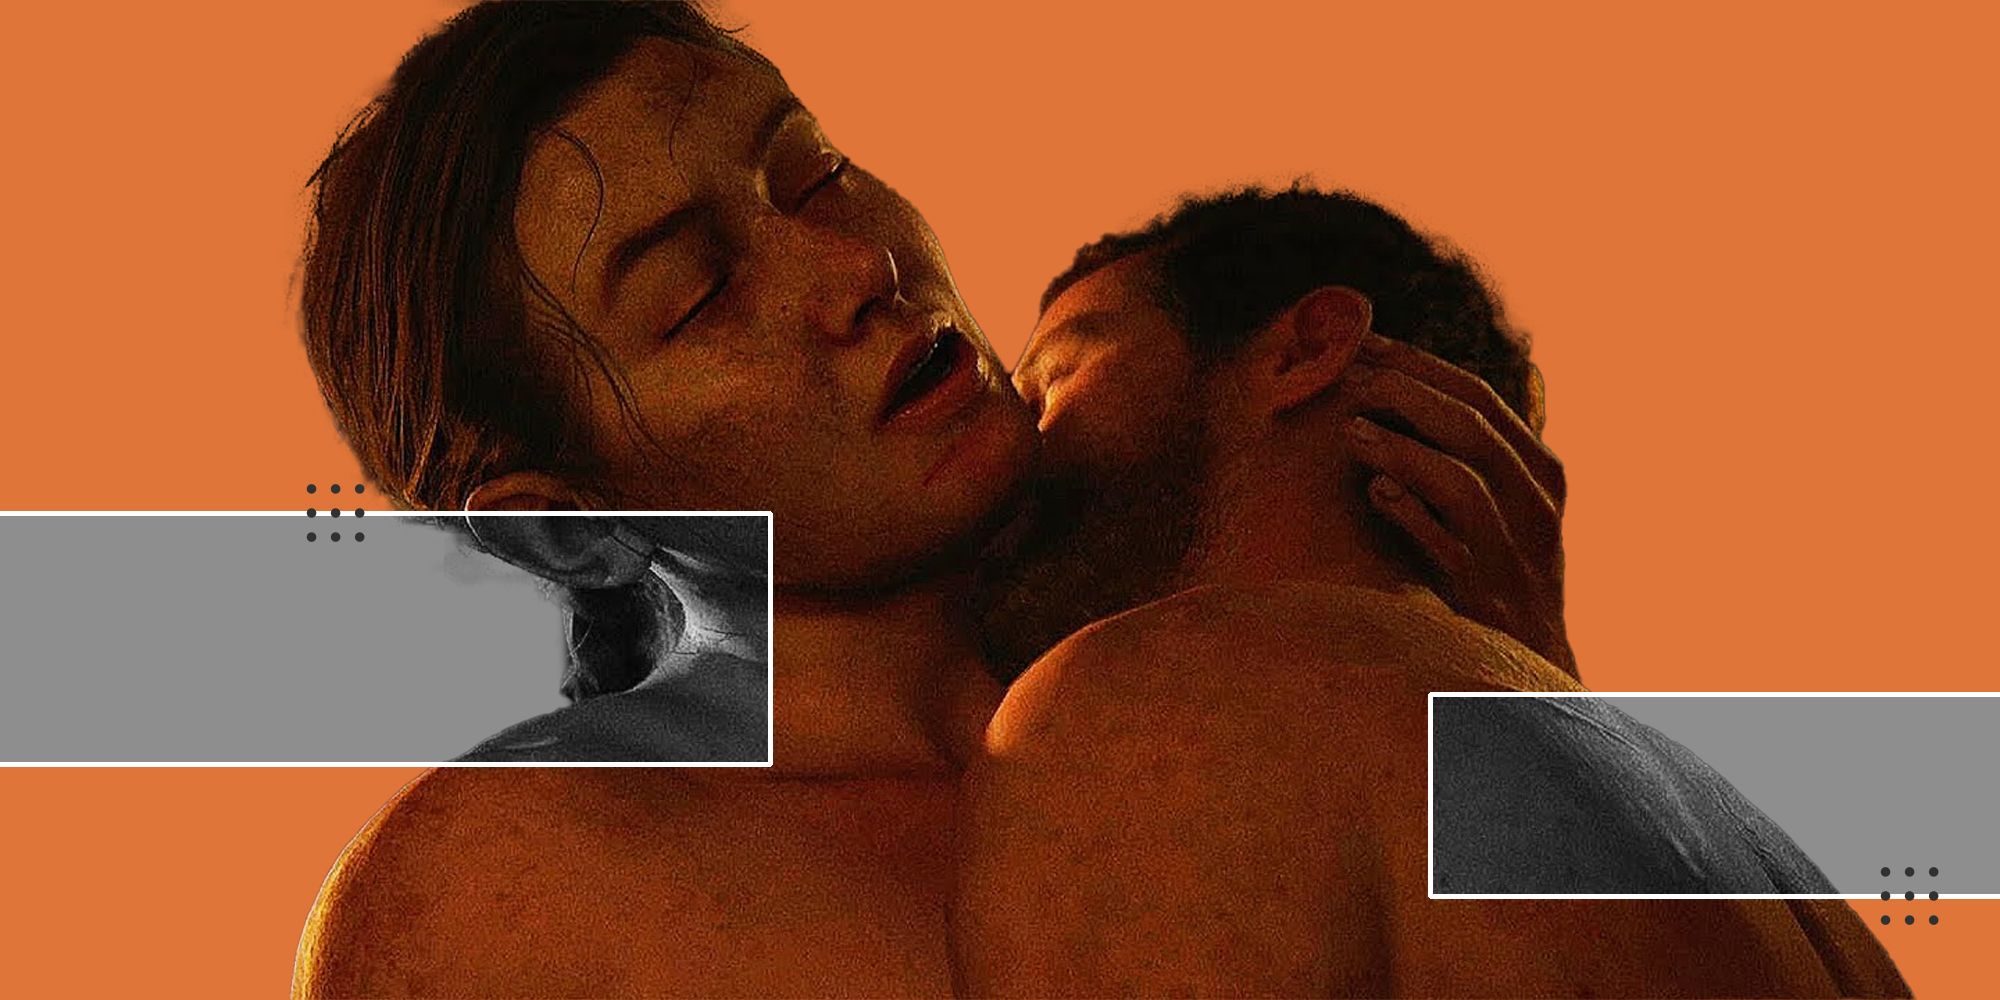 Abby and Owen's sex scene from The Last of Us Part 2 against an orange background with gray rectangles